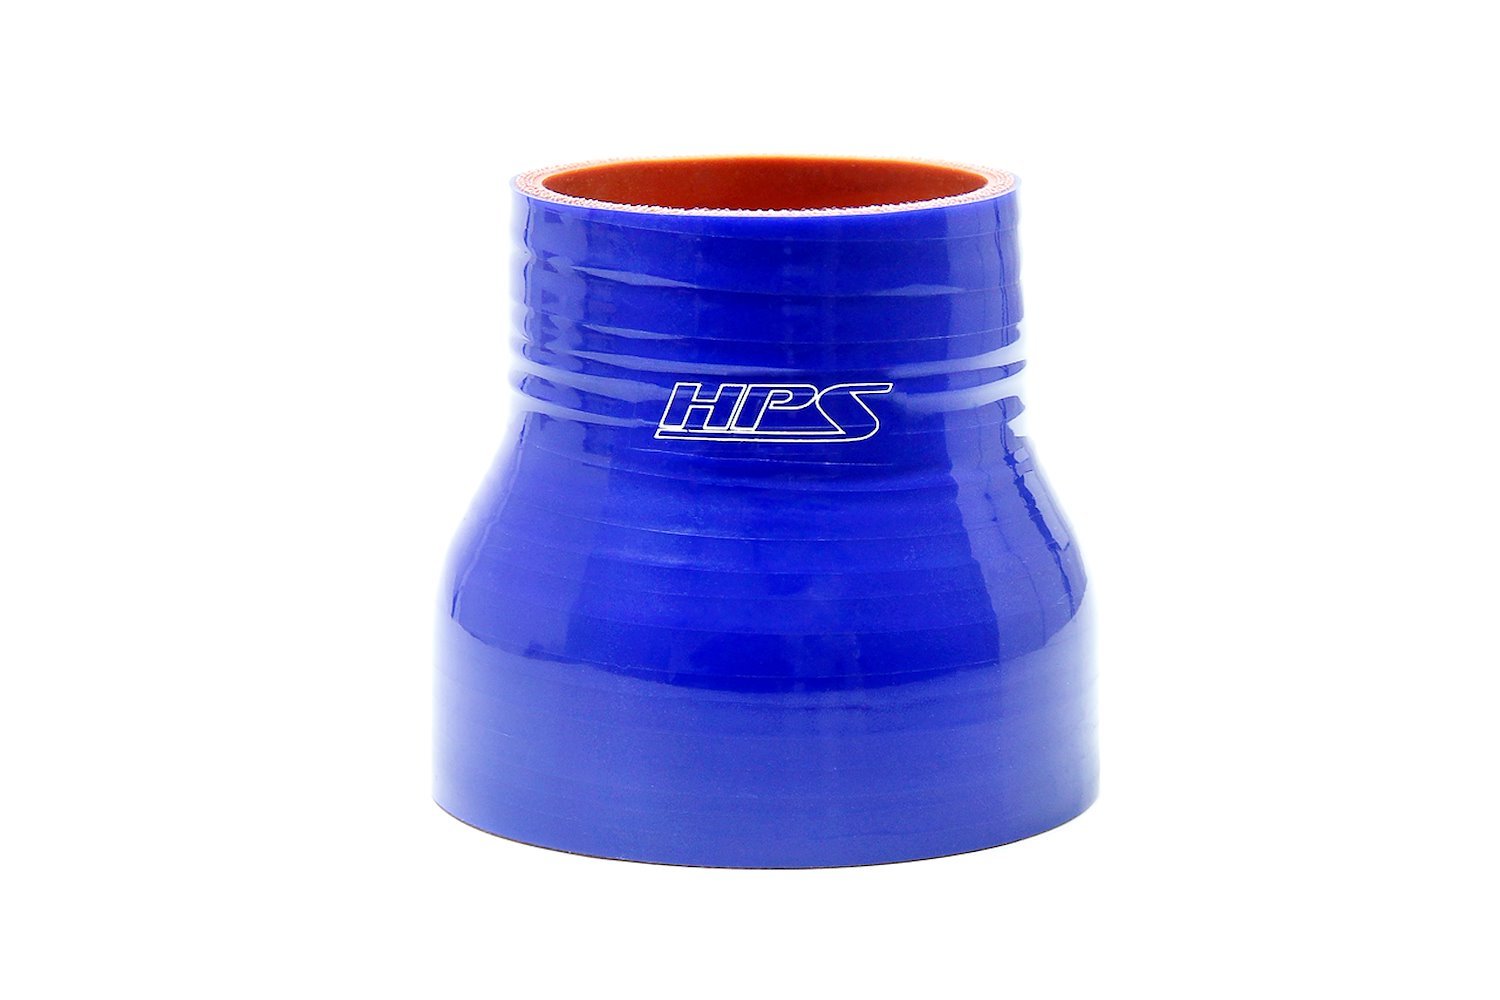 HTSR-200-275-L4-BLUE Silicone Reducer Hose, High-Temp 4-Ply Reinforced, 2 in. - 2-3/4 in. ID, 4 in. Long, Blue